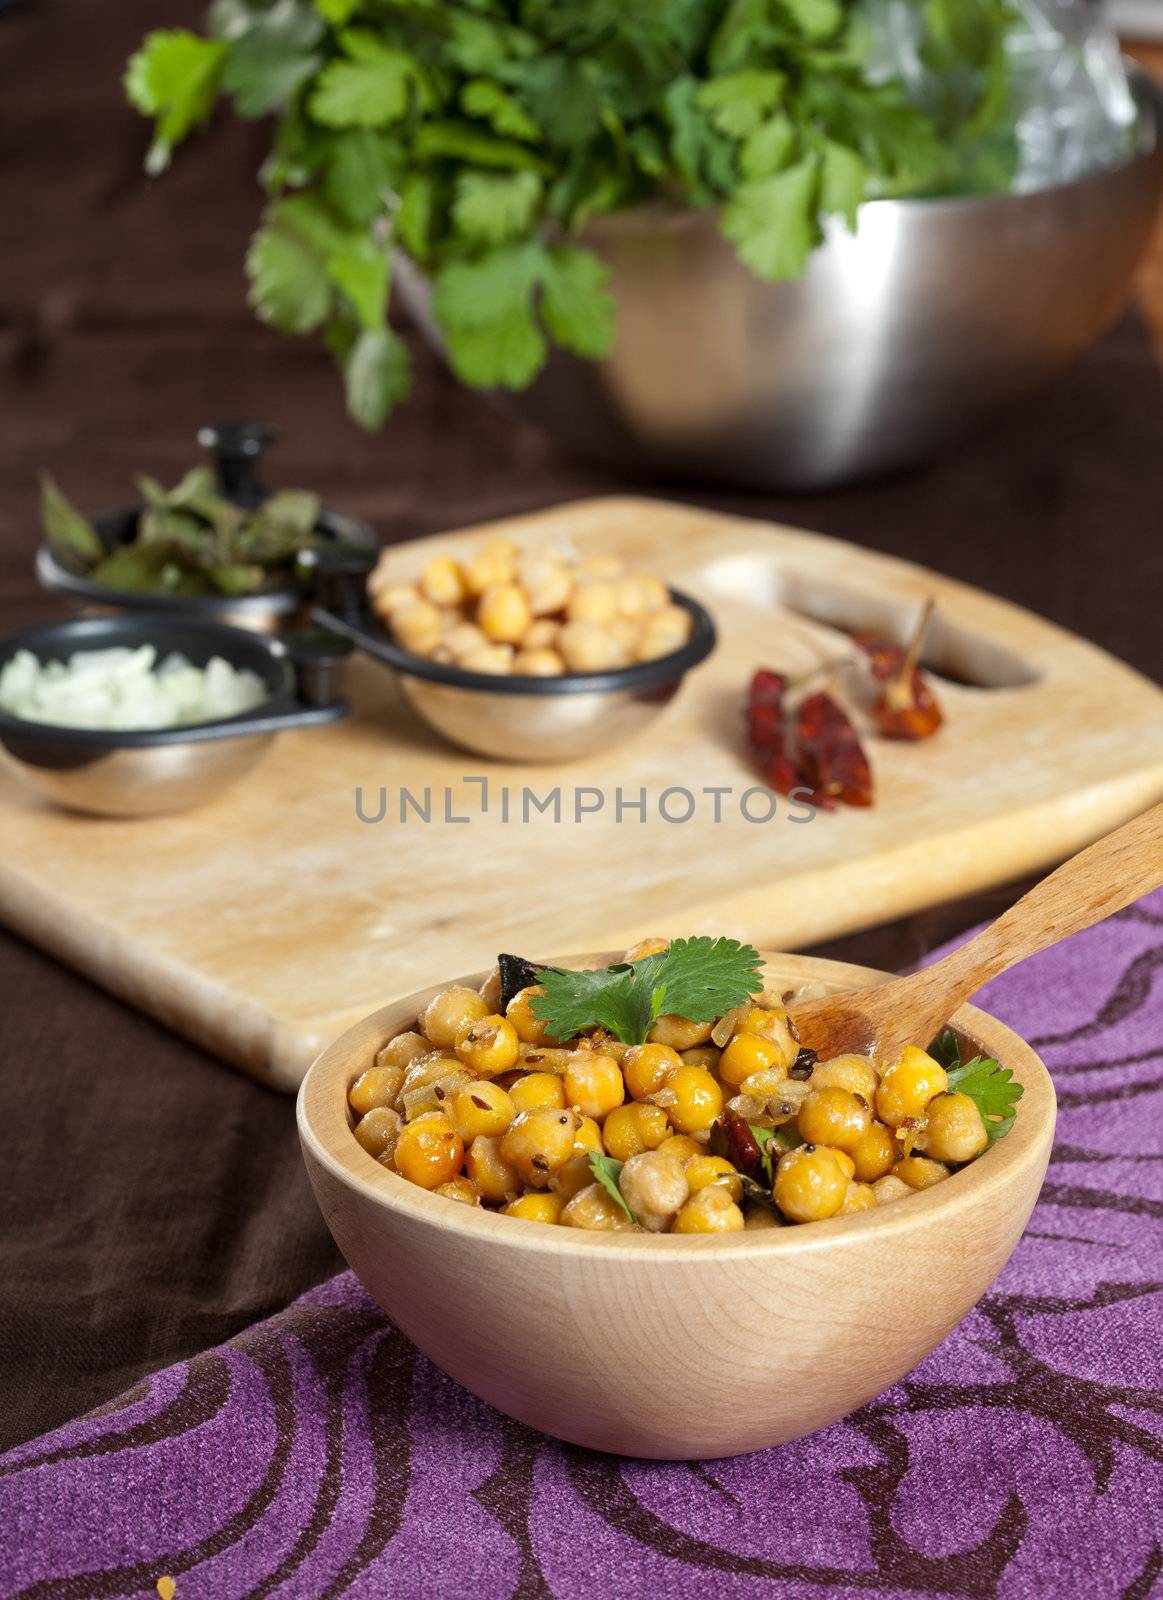 Chickpea appetizer by Fotosmurf